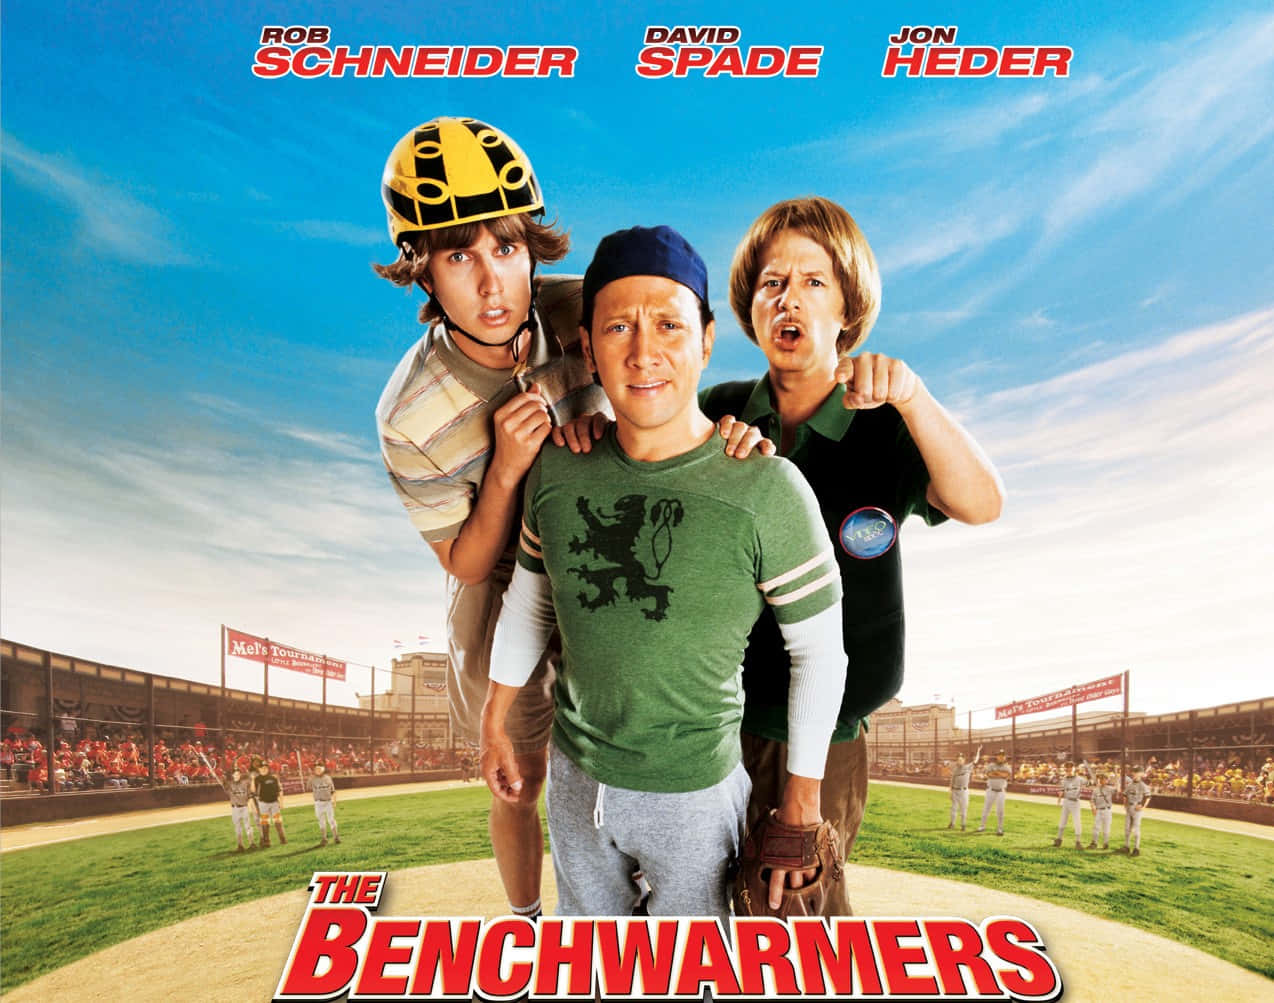 Robschneider - Bänkvärmarna. (this Could Be Used As A Potential Title For A Computer Or Mobile Wallpaper Featuring The Movie 